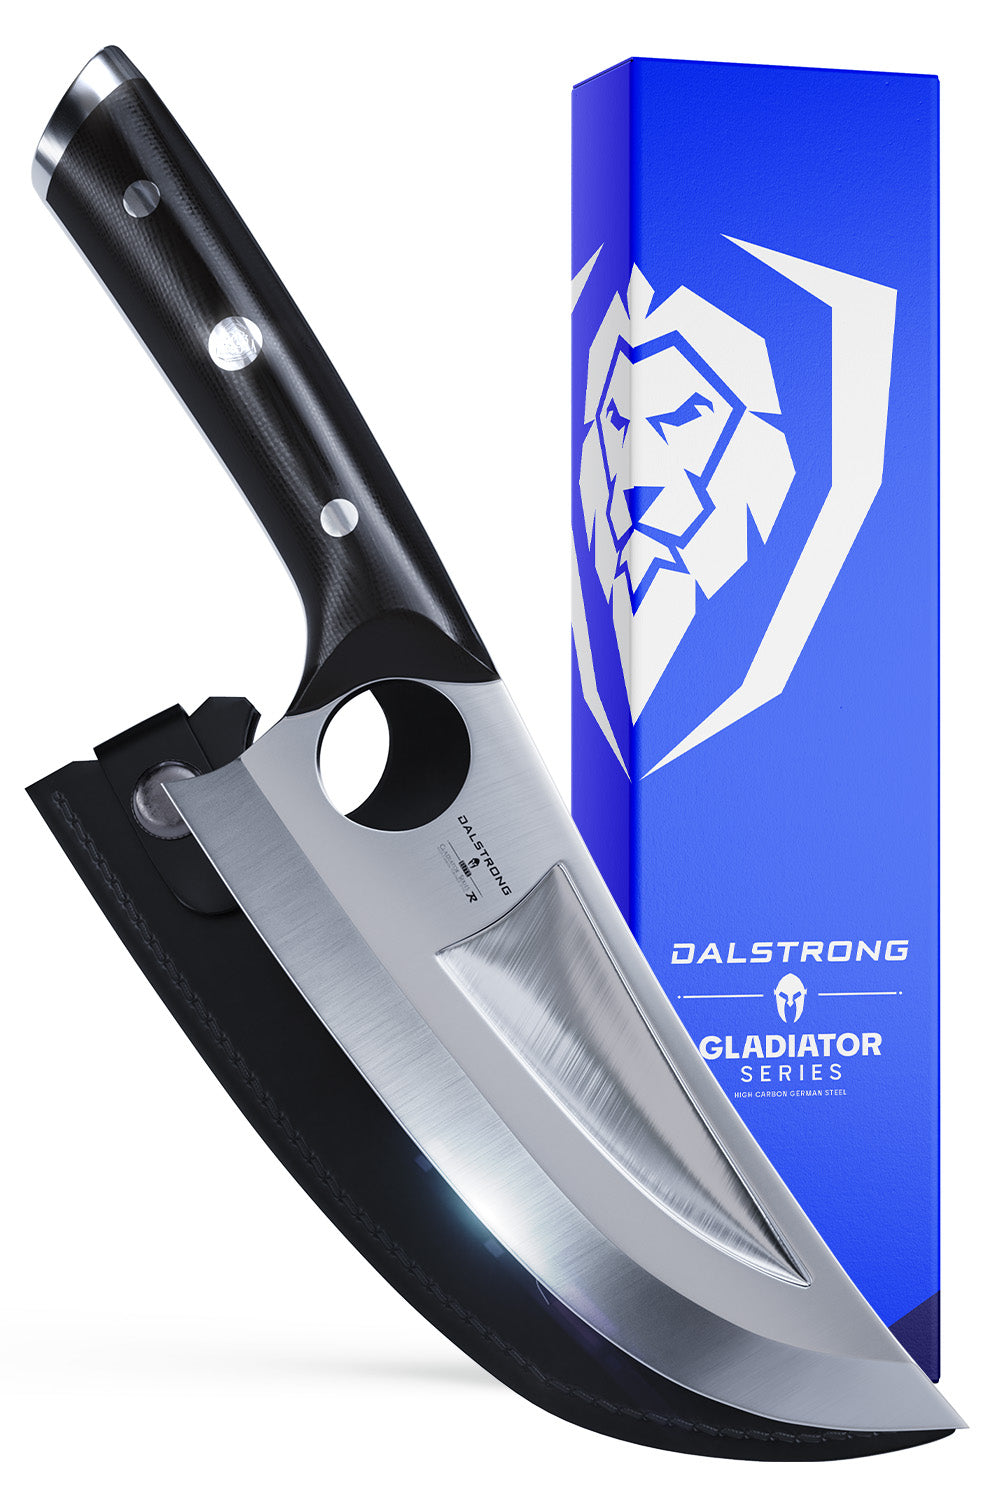 Chef & Utility Knife 7" | The Venator | Gladiator Series R | NSF Certified | Dalstrong ©